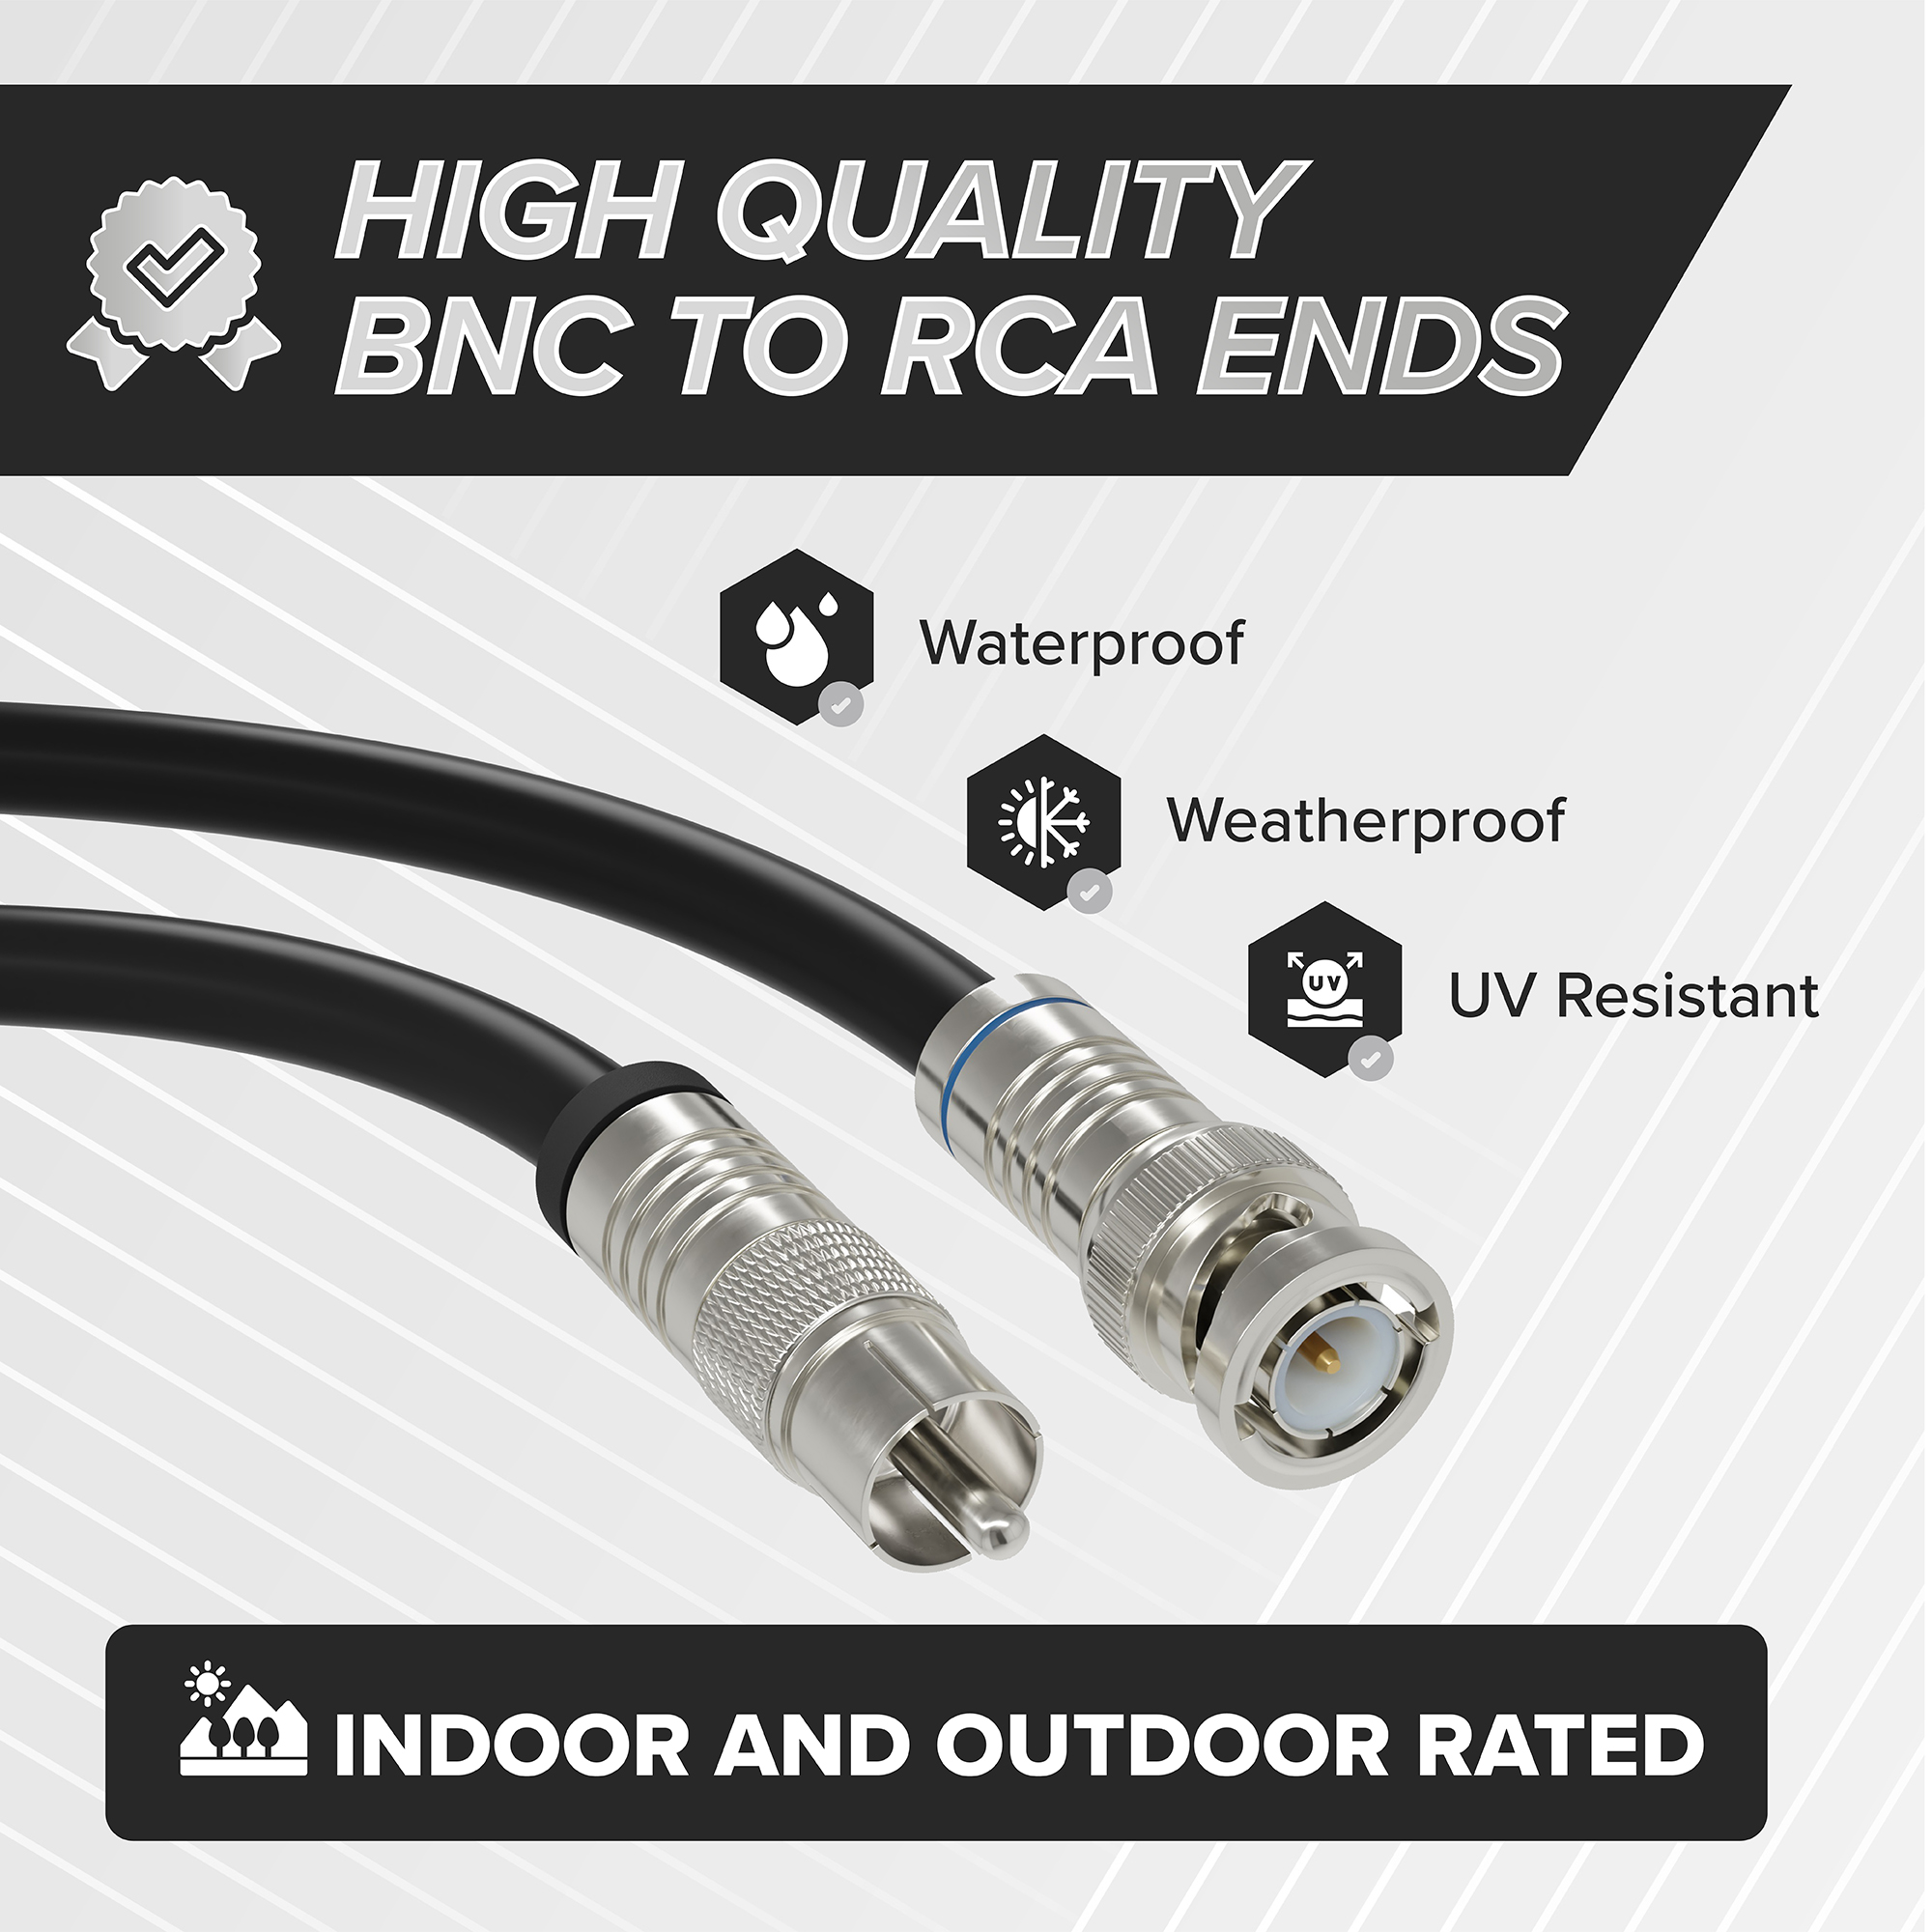 Black, 6 ft BNC to RCA RG6 Cable - Professional Grade - Male BNC to Male RCA Cable  - BNC Cable - 75 Ohm Coaxial, 50/75 Ohm Connectors, SDI, HD-SDI, CCTV, Camera, and More - 6 Feet Long, in Black - image 3 of 10